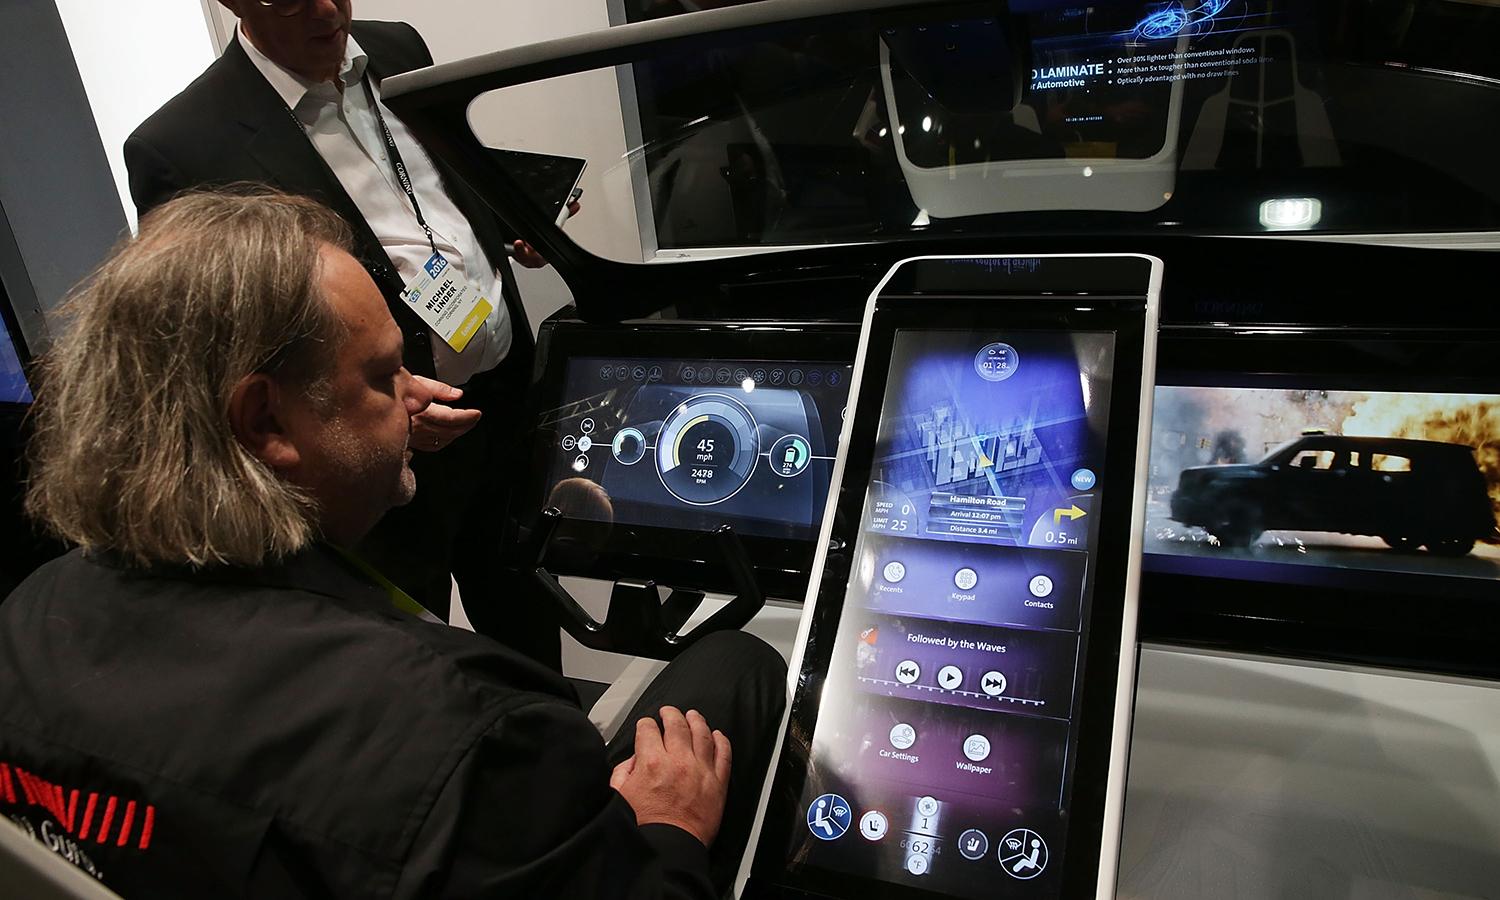 Show attendees check out a prototype of a connected car console at a consumer technology trade show